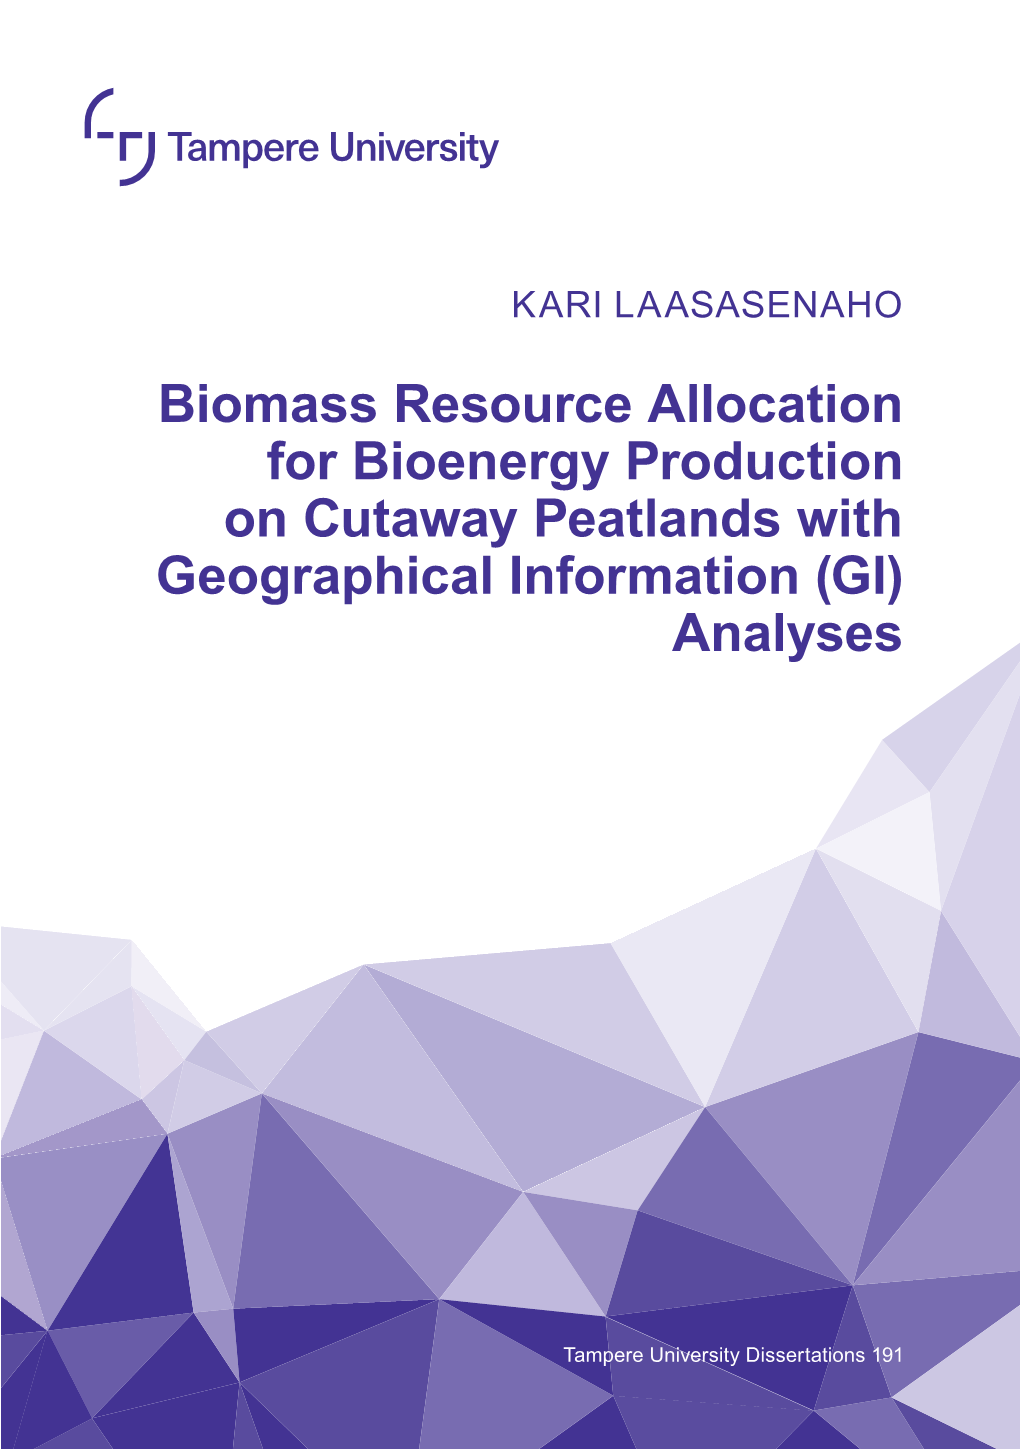 Biomass Resource Allocation for Bioenergy Production on Cutaway Peatlands with Geographical Information (GI) Analyses